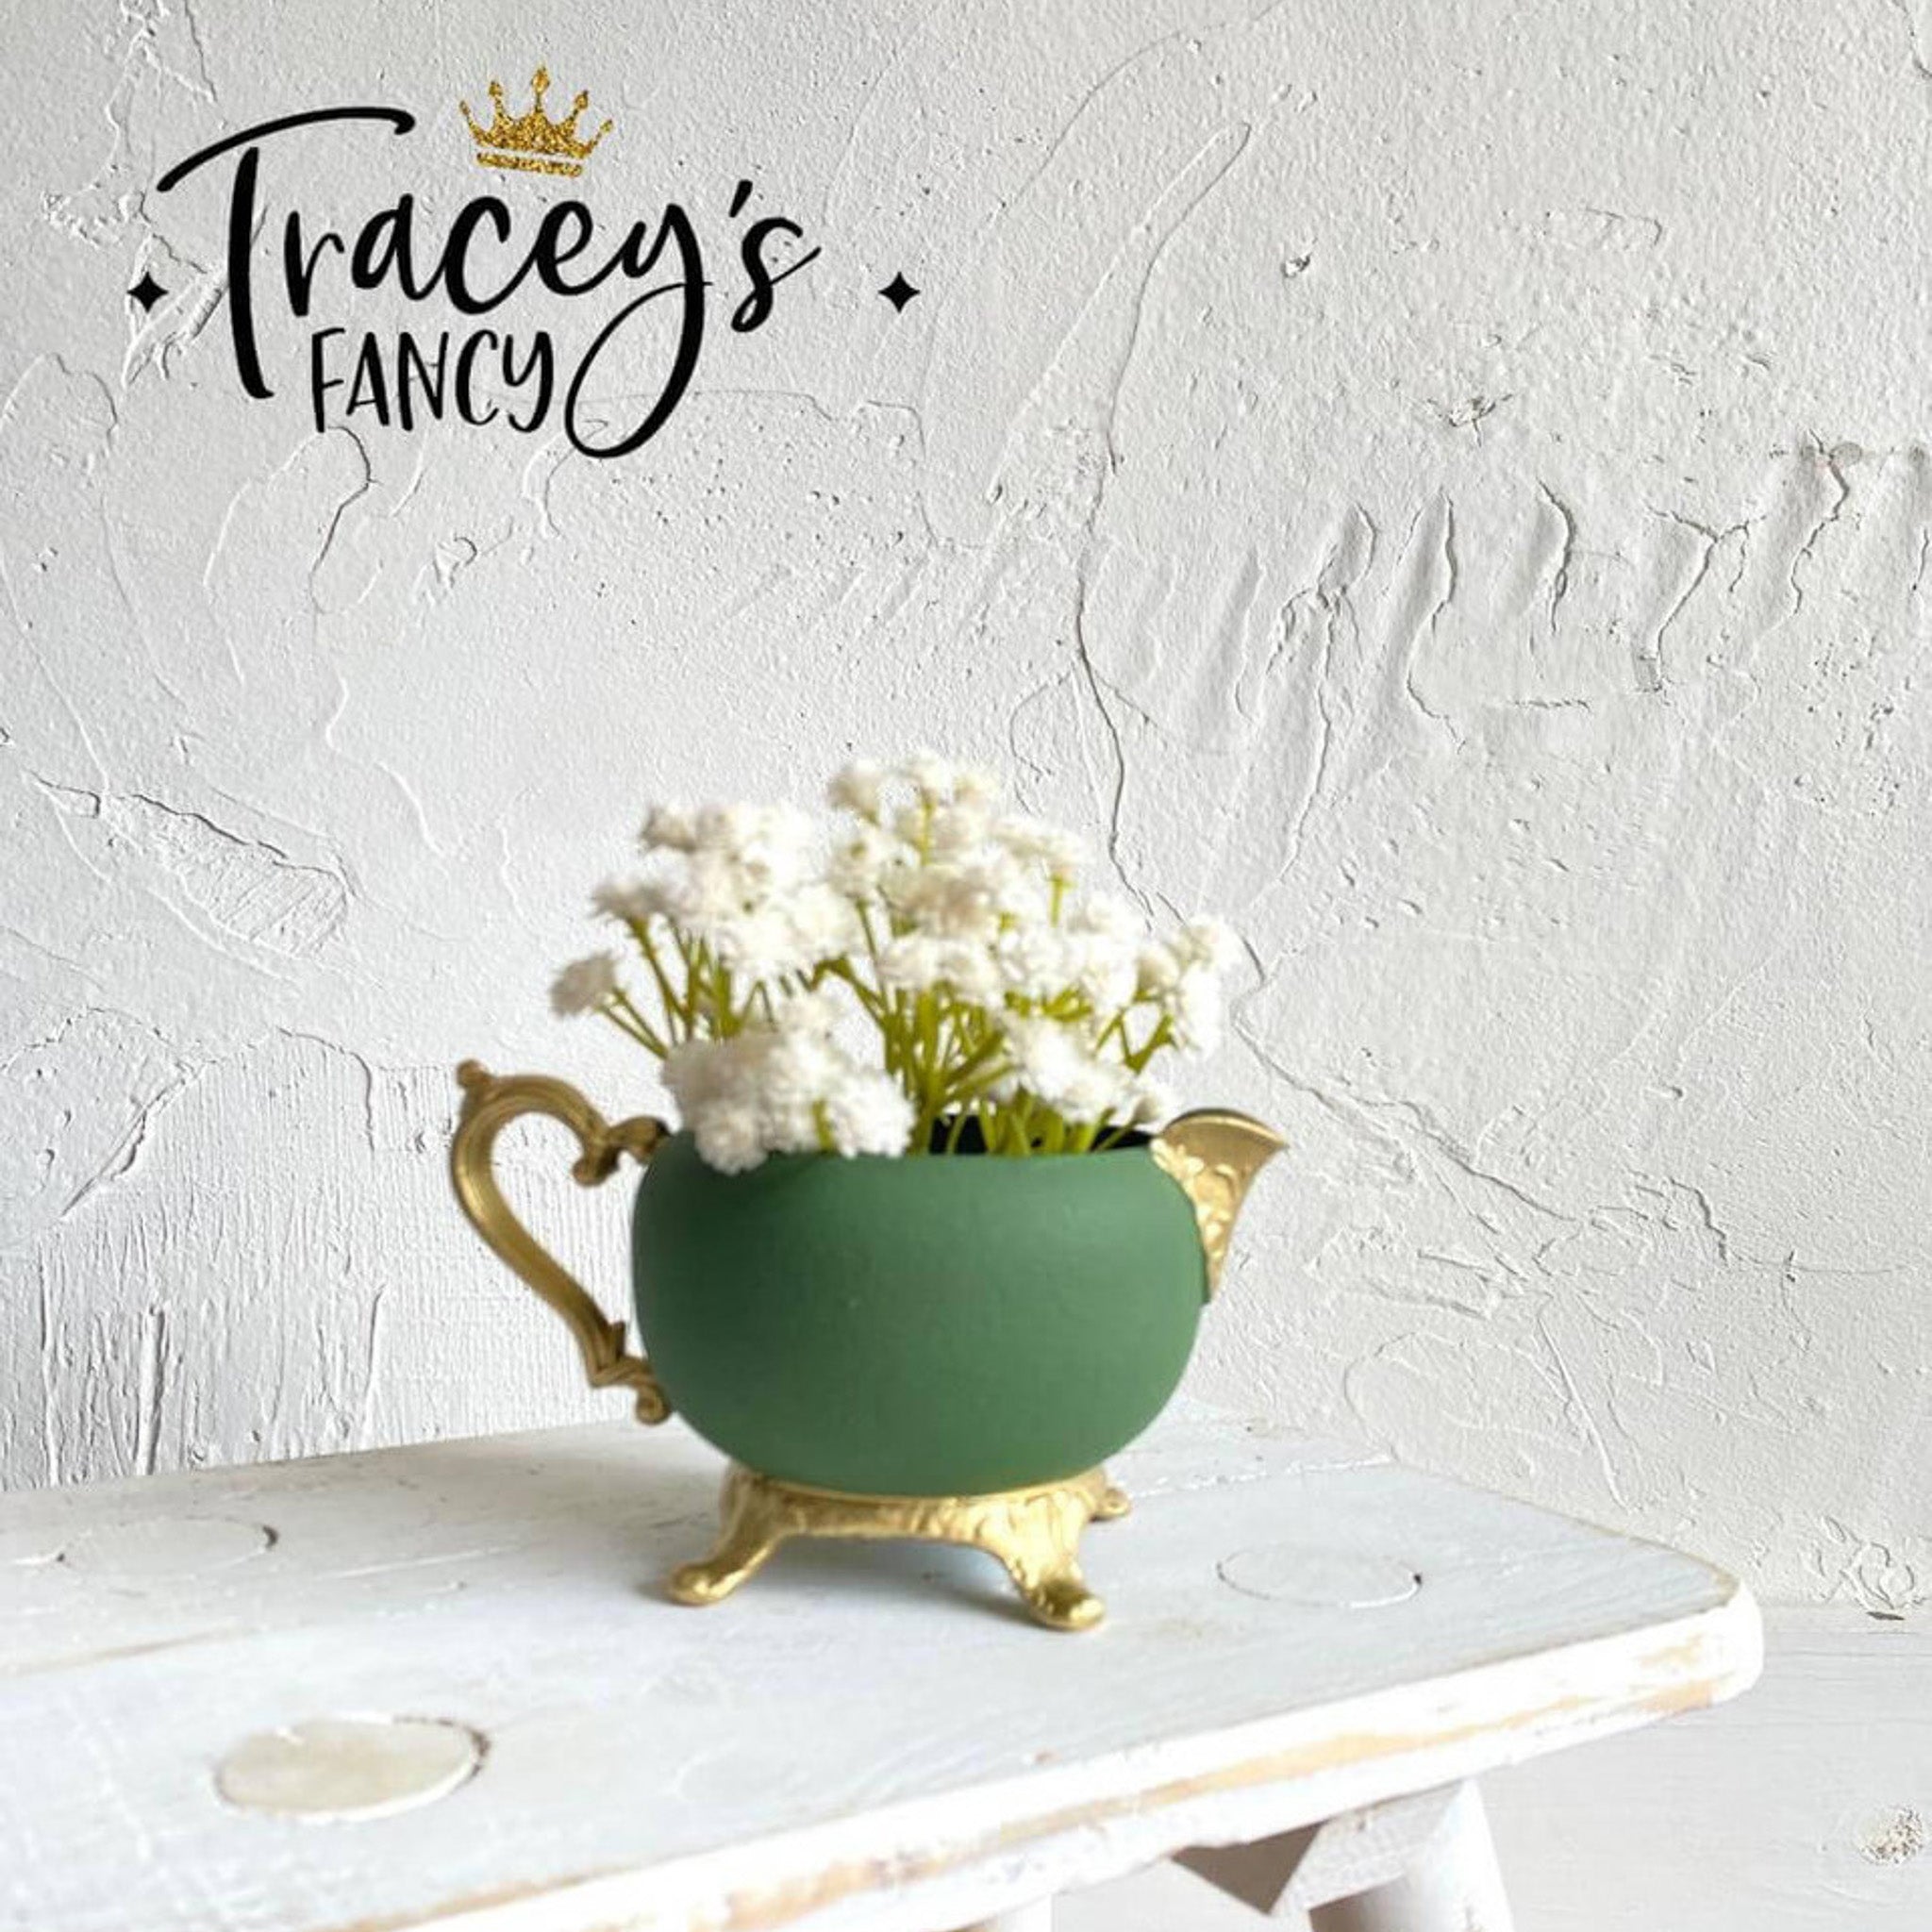 A small ceramic vase created by Tracey's Fancy is painted in Dixie Belle's English Ivy and has gold-painted legs, handle, and spout.